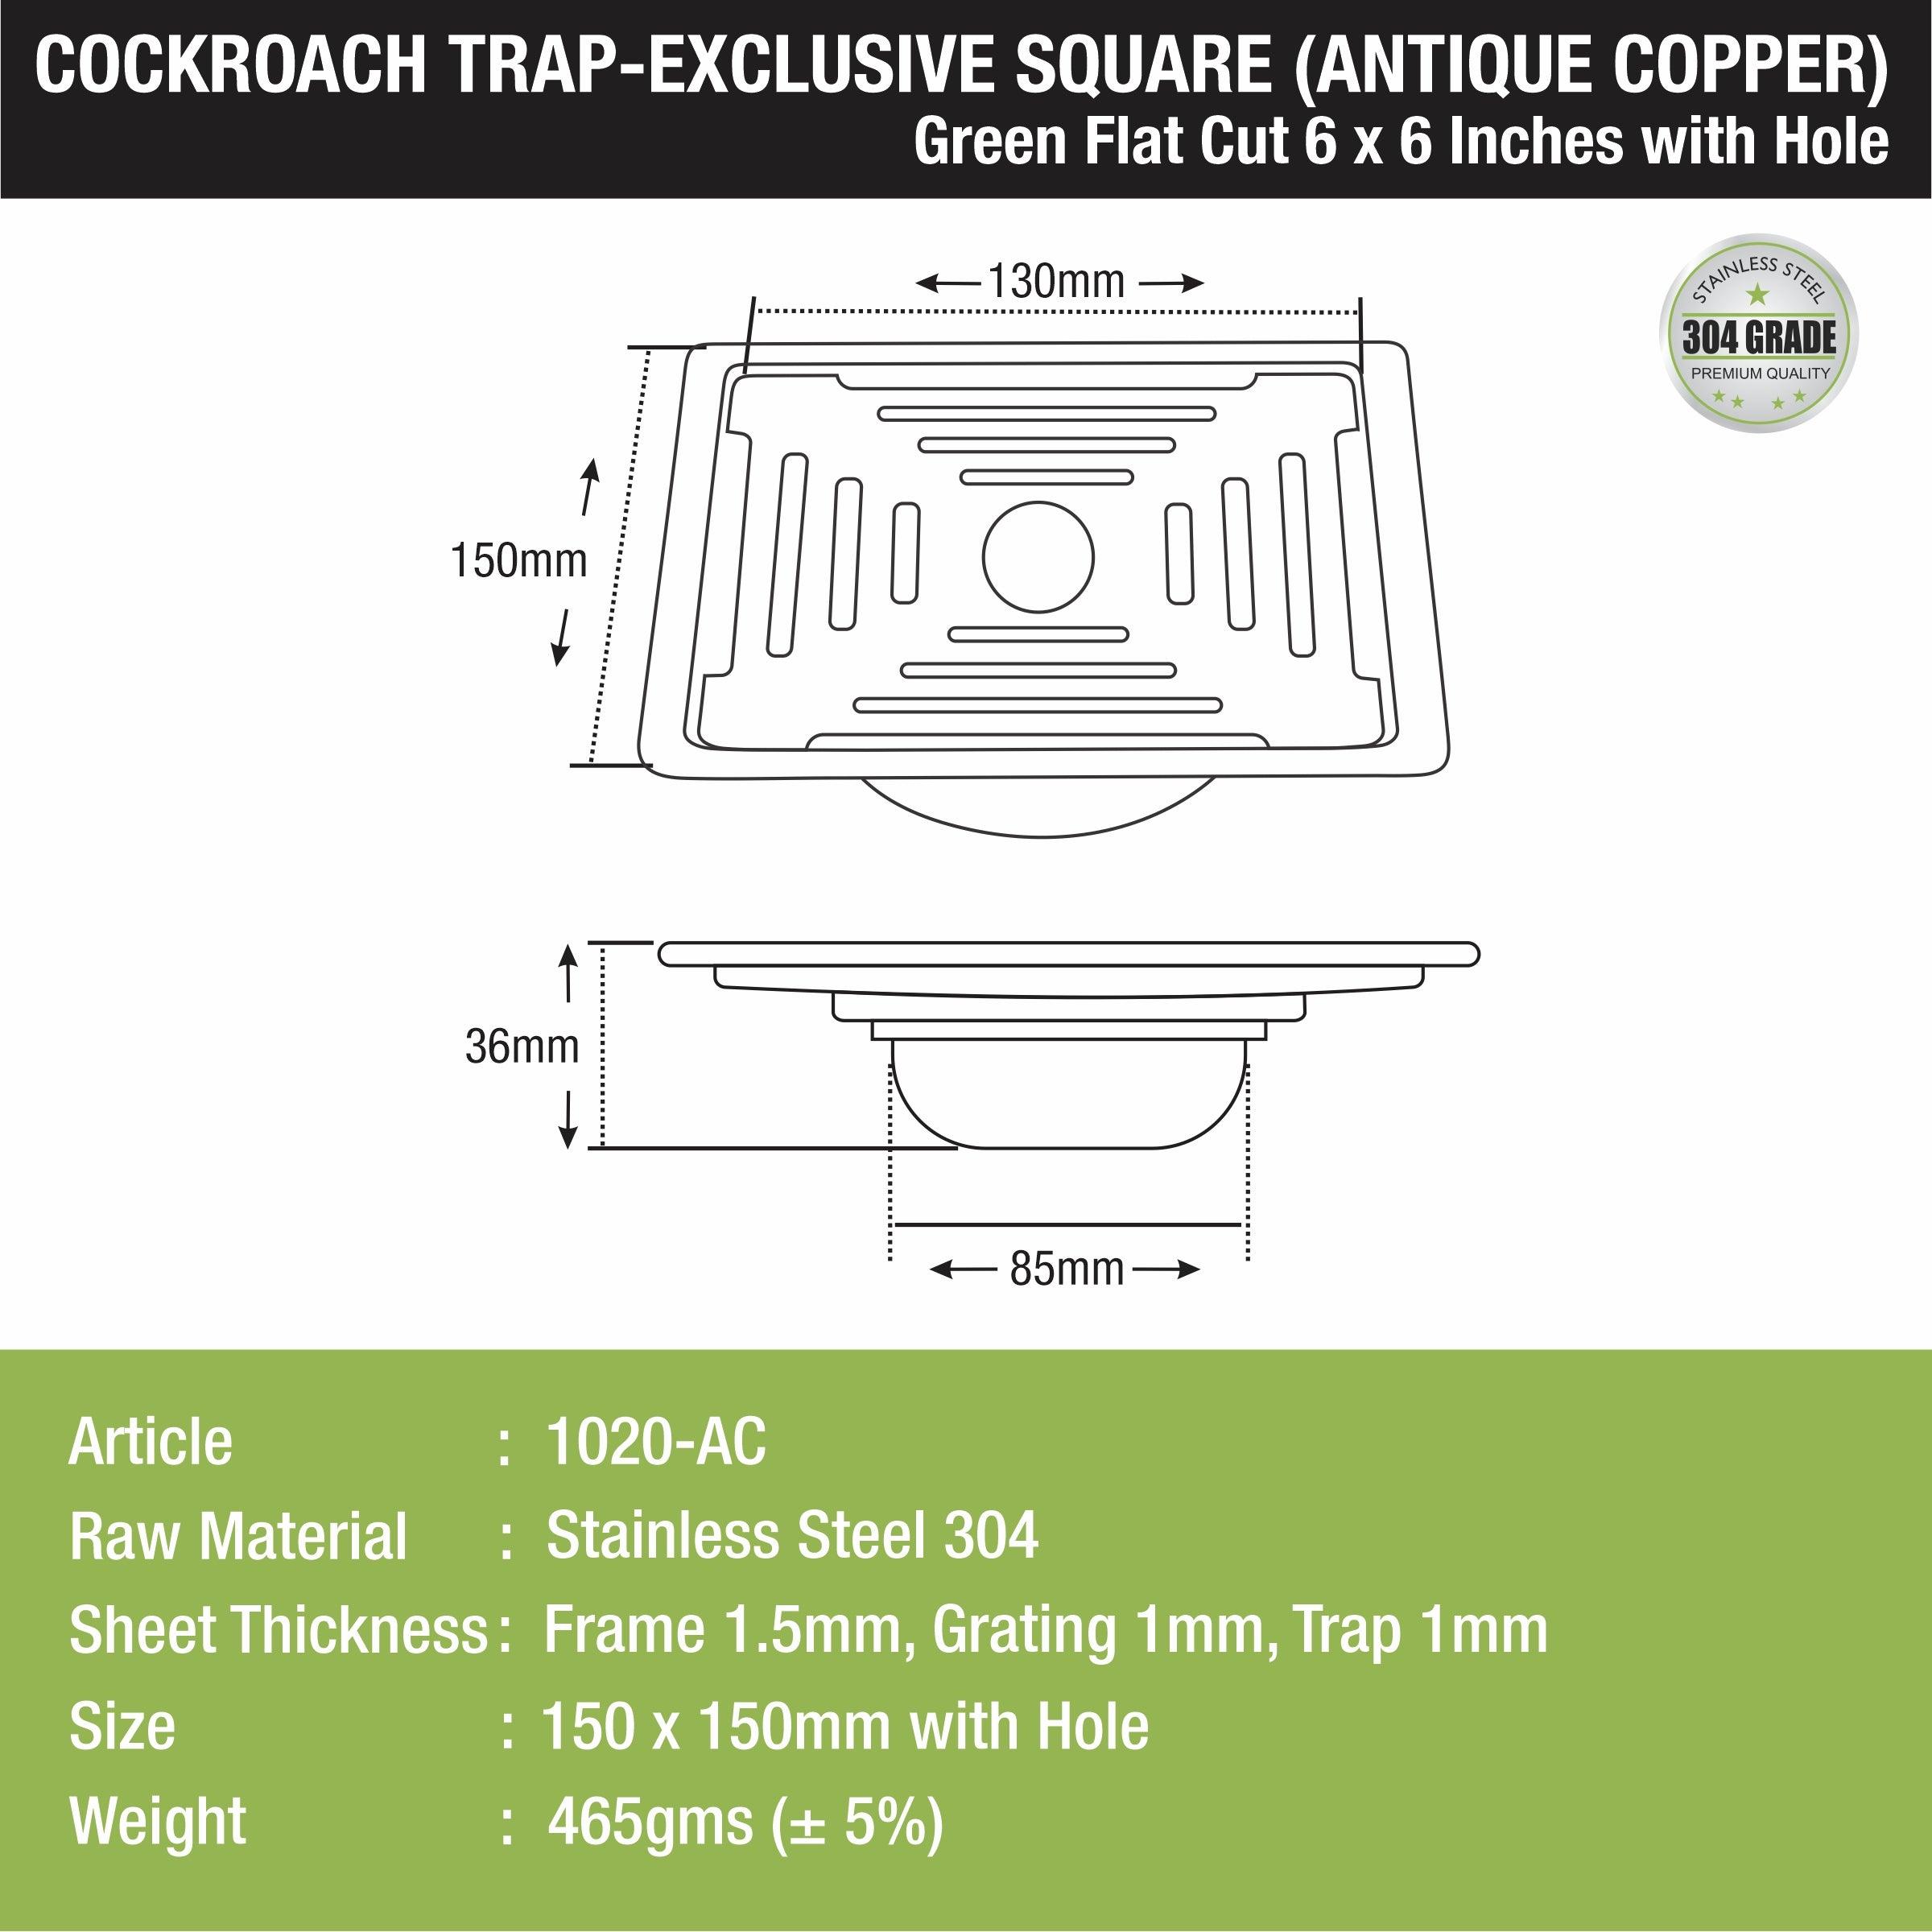 Green Exclusive Square Flat Cut Floor Drain in Antique Copper PVD Coating (6 x 6 Inches) with Hole & Cockroach Trap sizes and dimensions